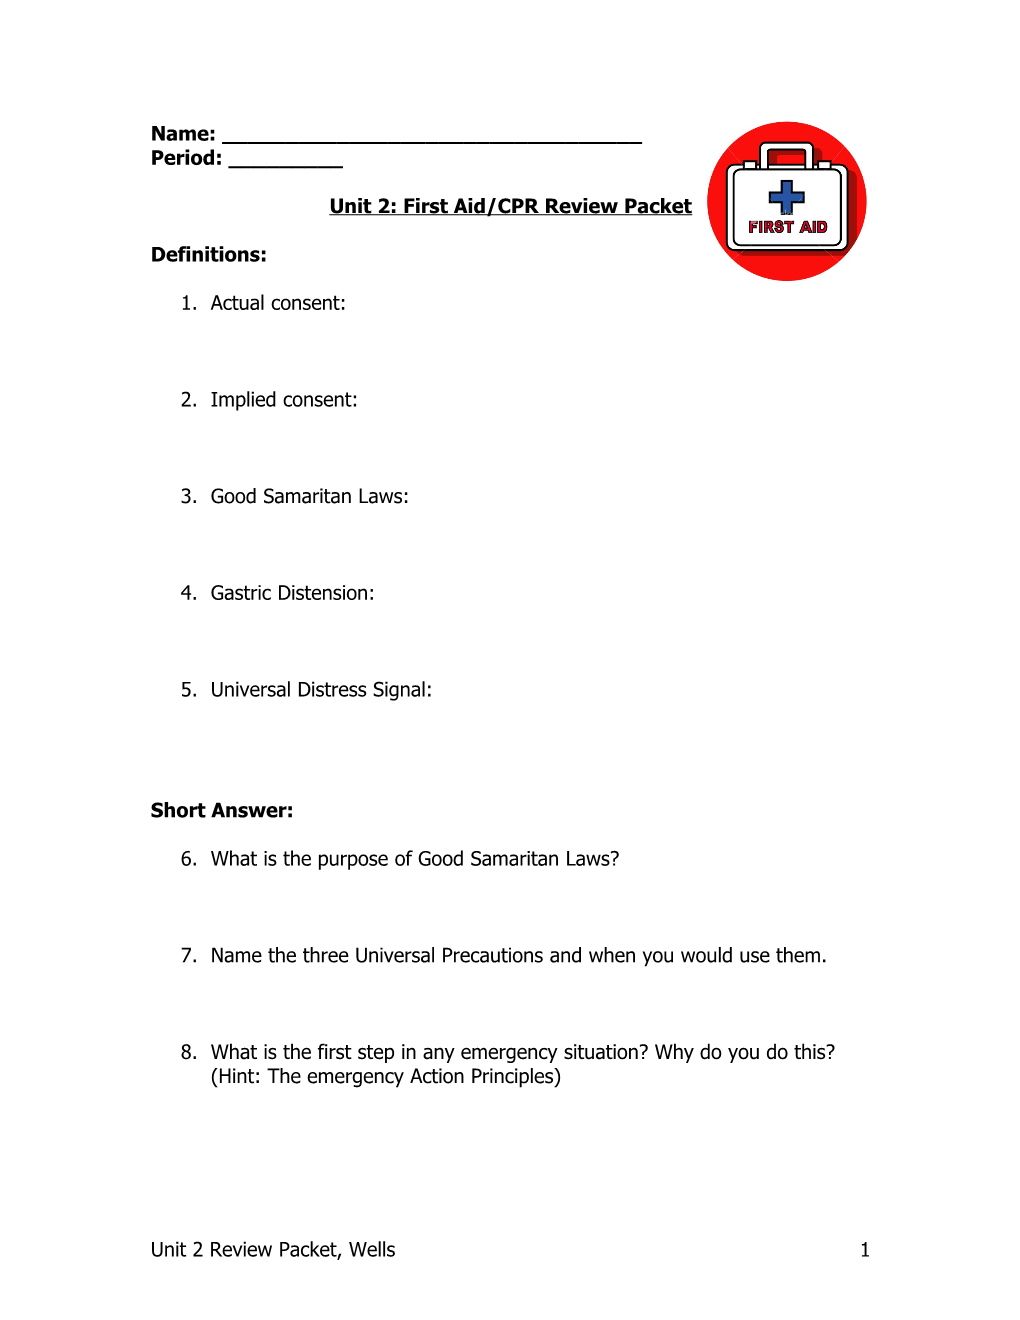 Unit 2: First Aid/CPR Review Packet